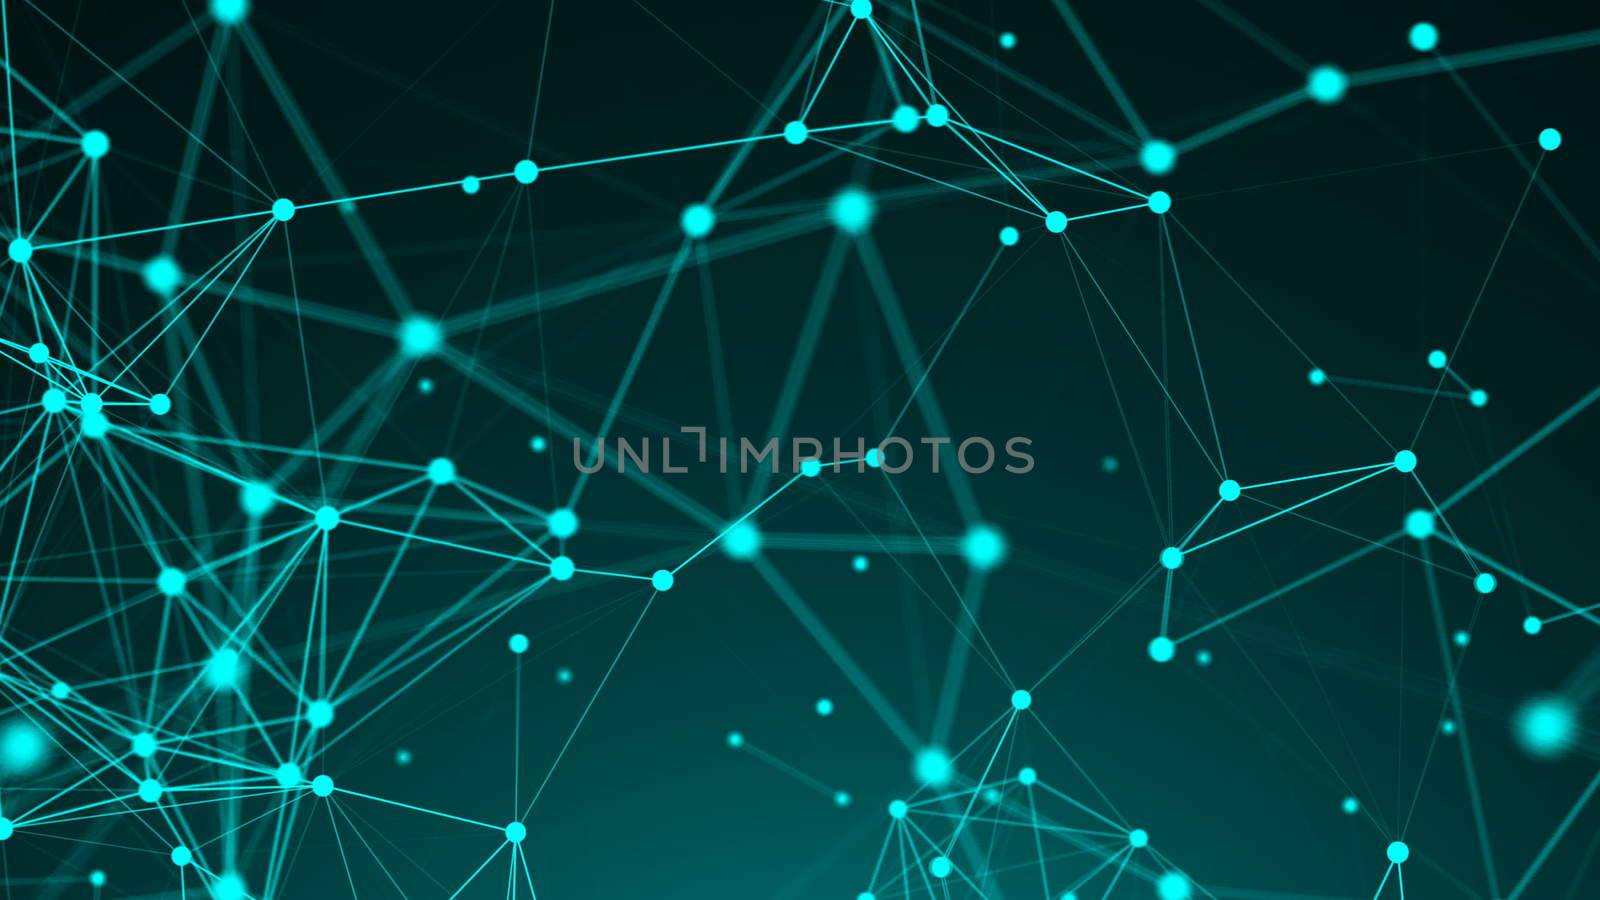 Abstract background, geometry surfaces, lines, digits and points. Abstract grid by nolimit046